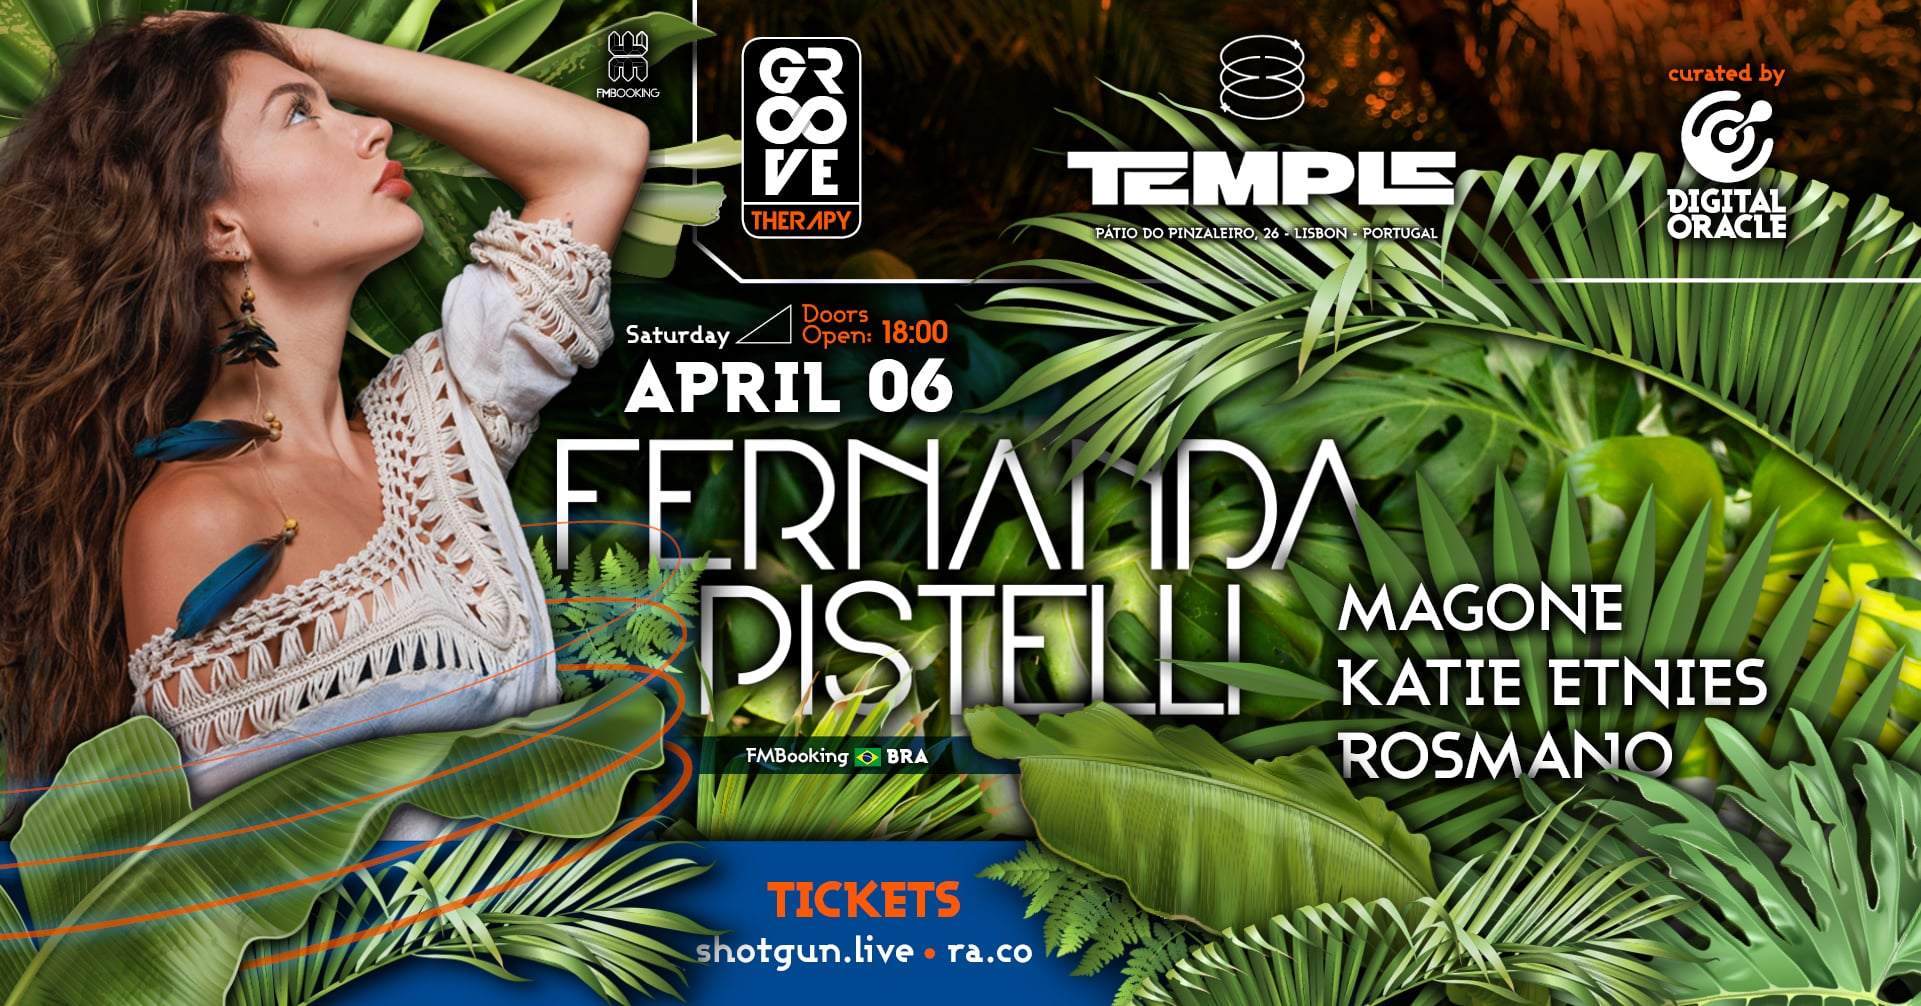 Groove therapy with Fernanda Pistelli / TEMPLE LX - Página frontal